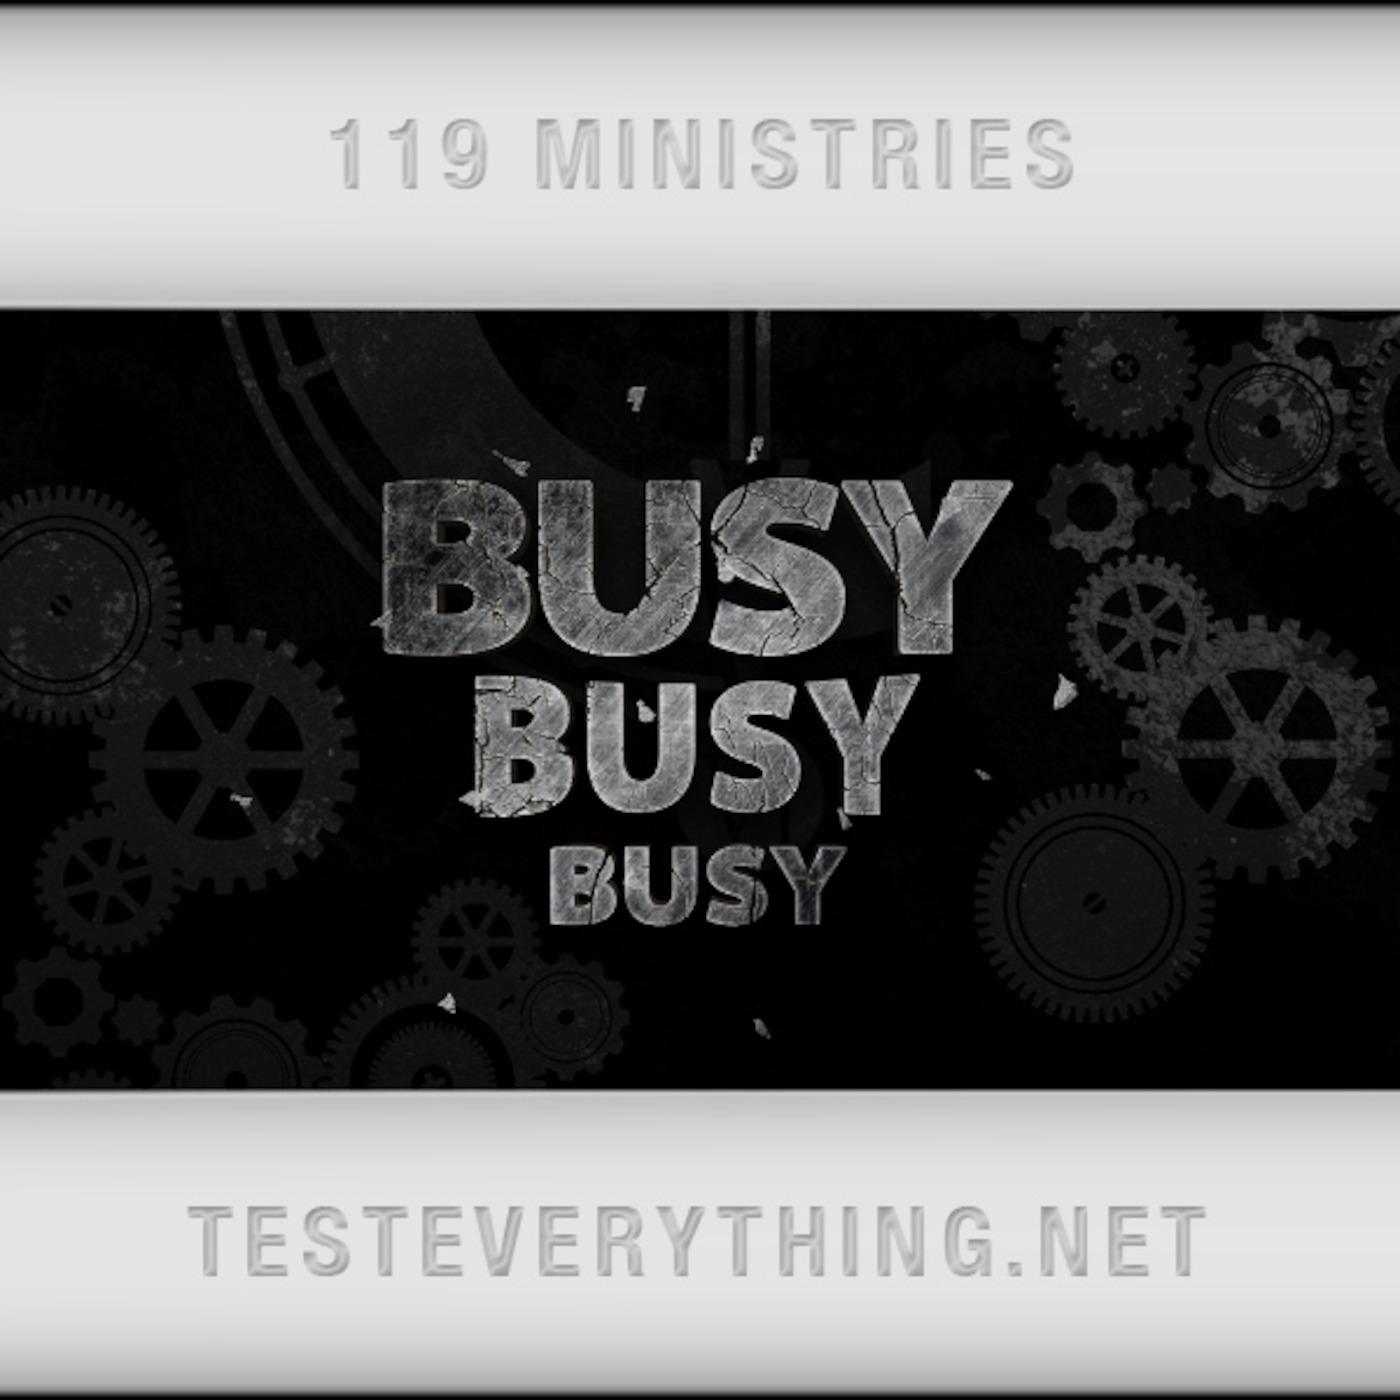 Messages: Busy, Busy, Busy